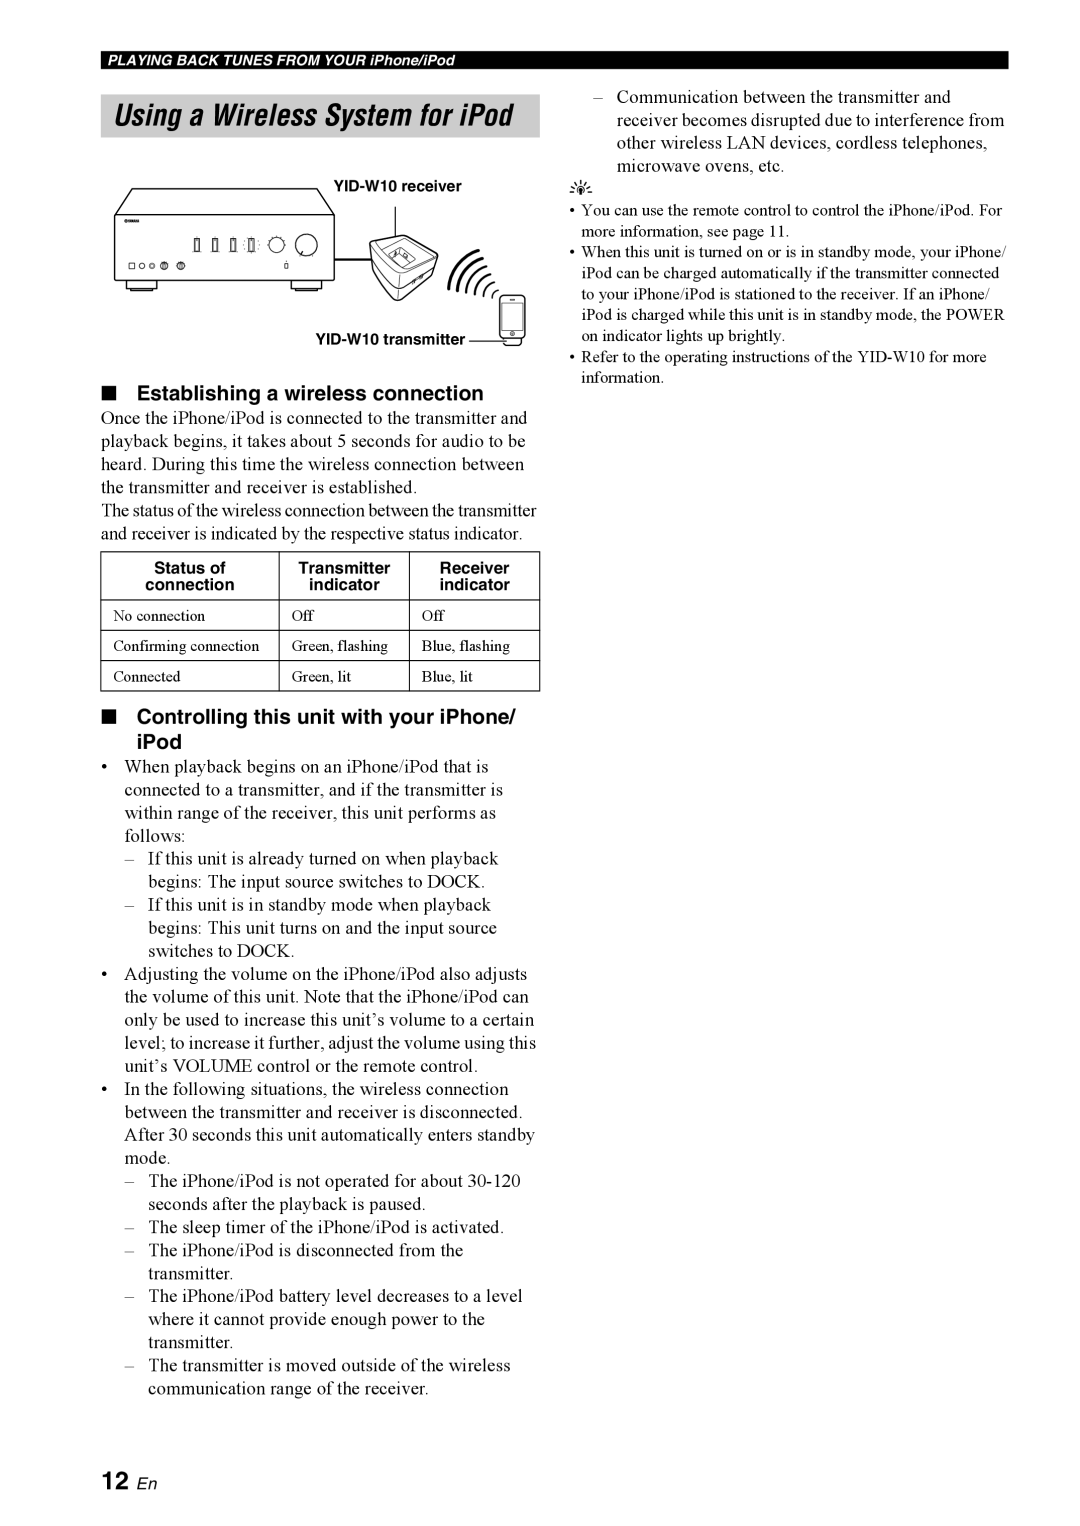 Yamaha A-S300BL owner manual Using a Wireless System for iPod, 12 En, Establishing a wireless connection 